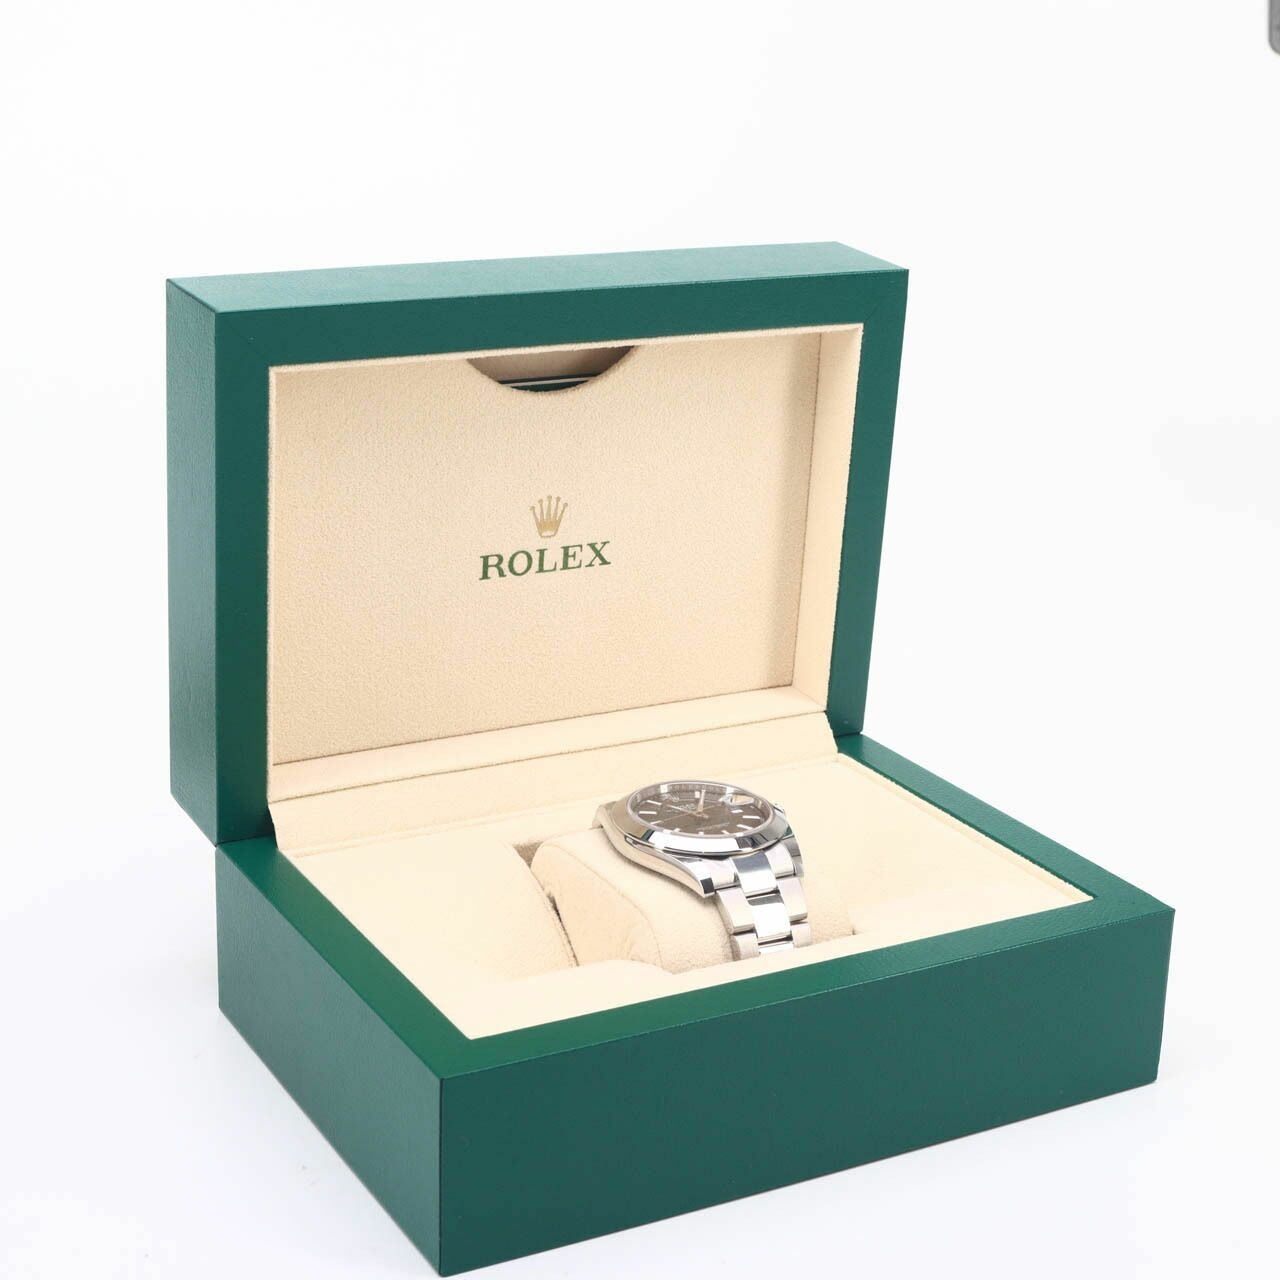 Rolex Oyster Silver/Black Perpetual Datejust 41 Dial 2022 Watch 